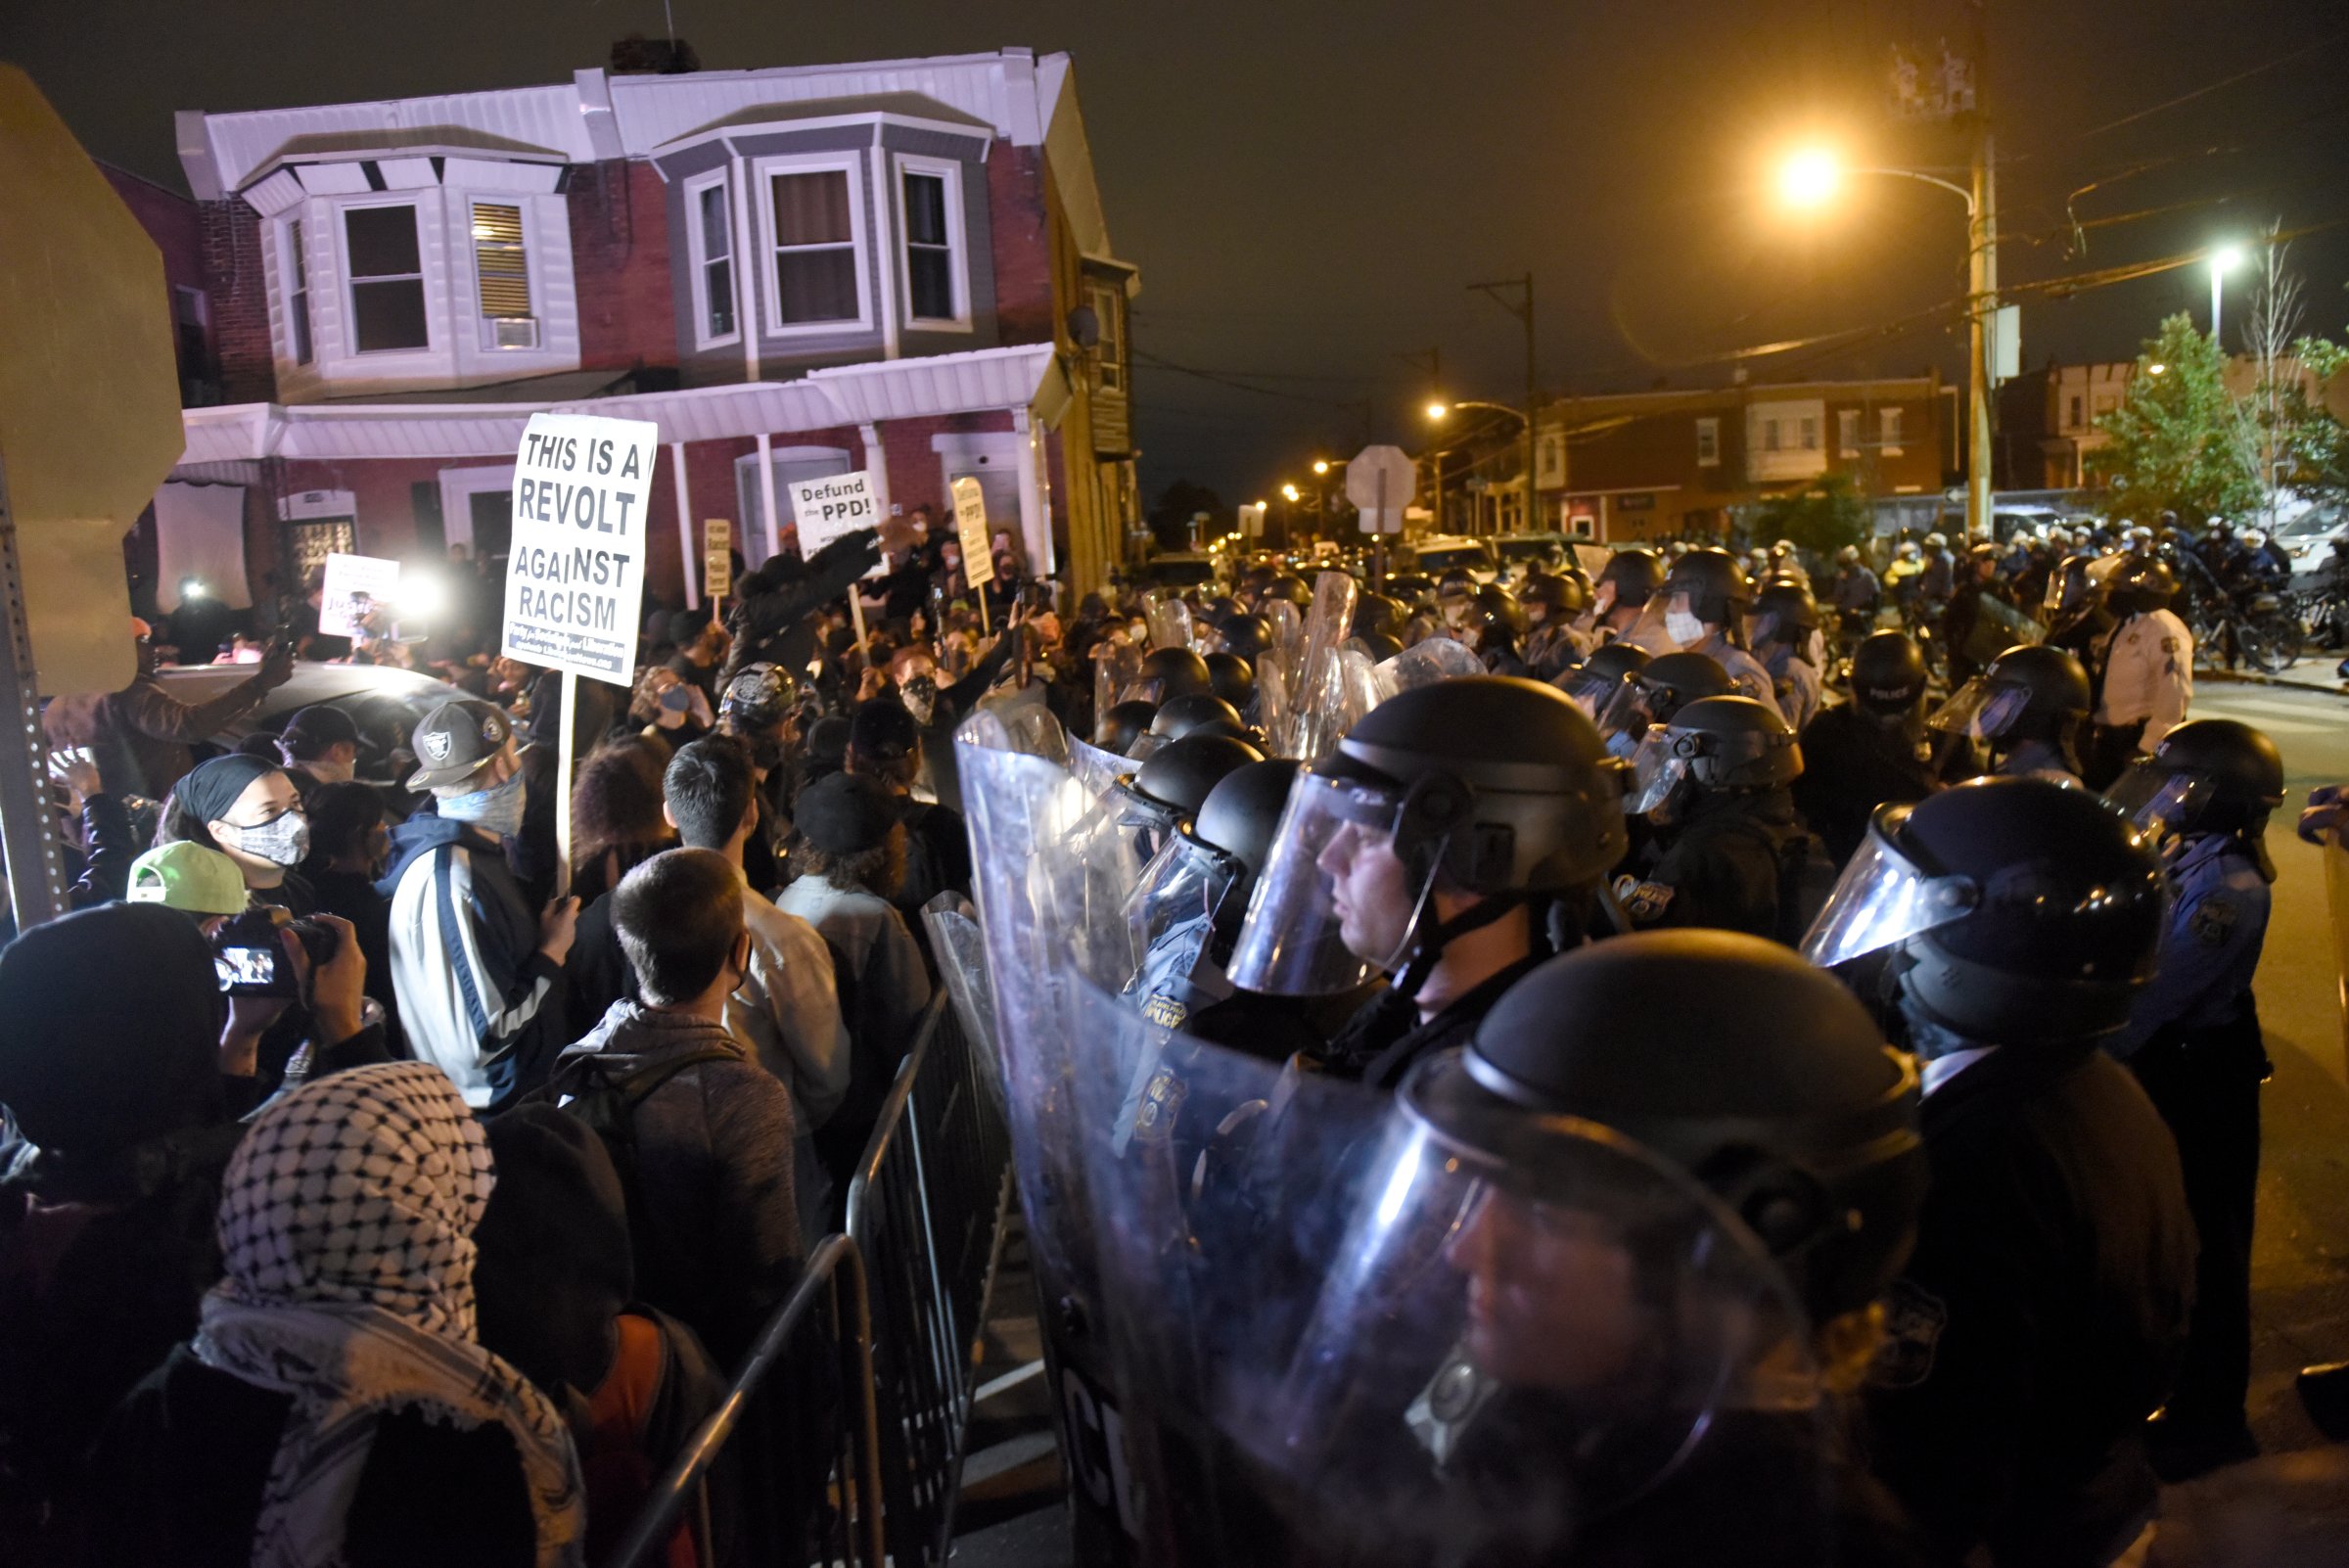 Protesters face off with police during a demonstration Tuesday, Oct. 27, 2020, in Philadelphia